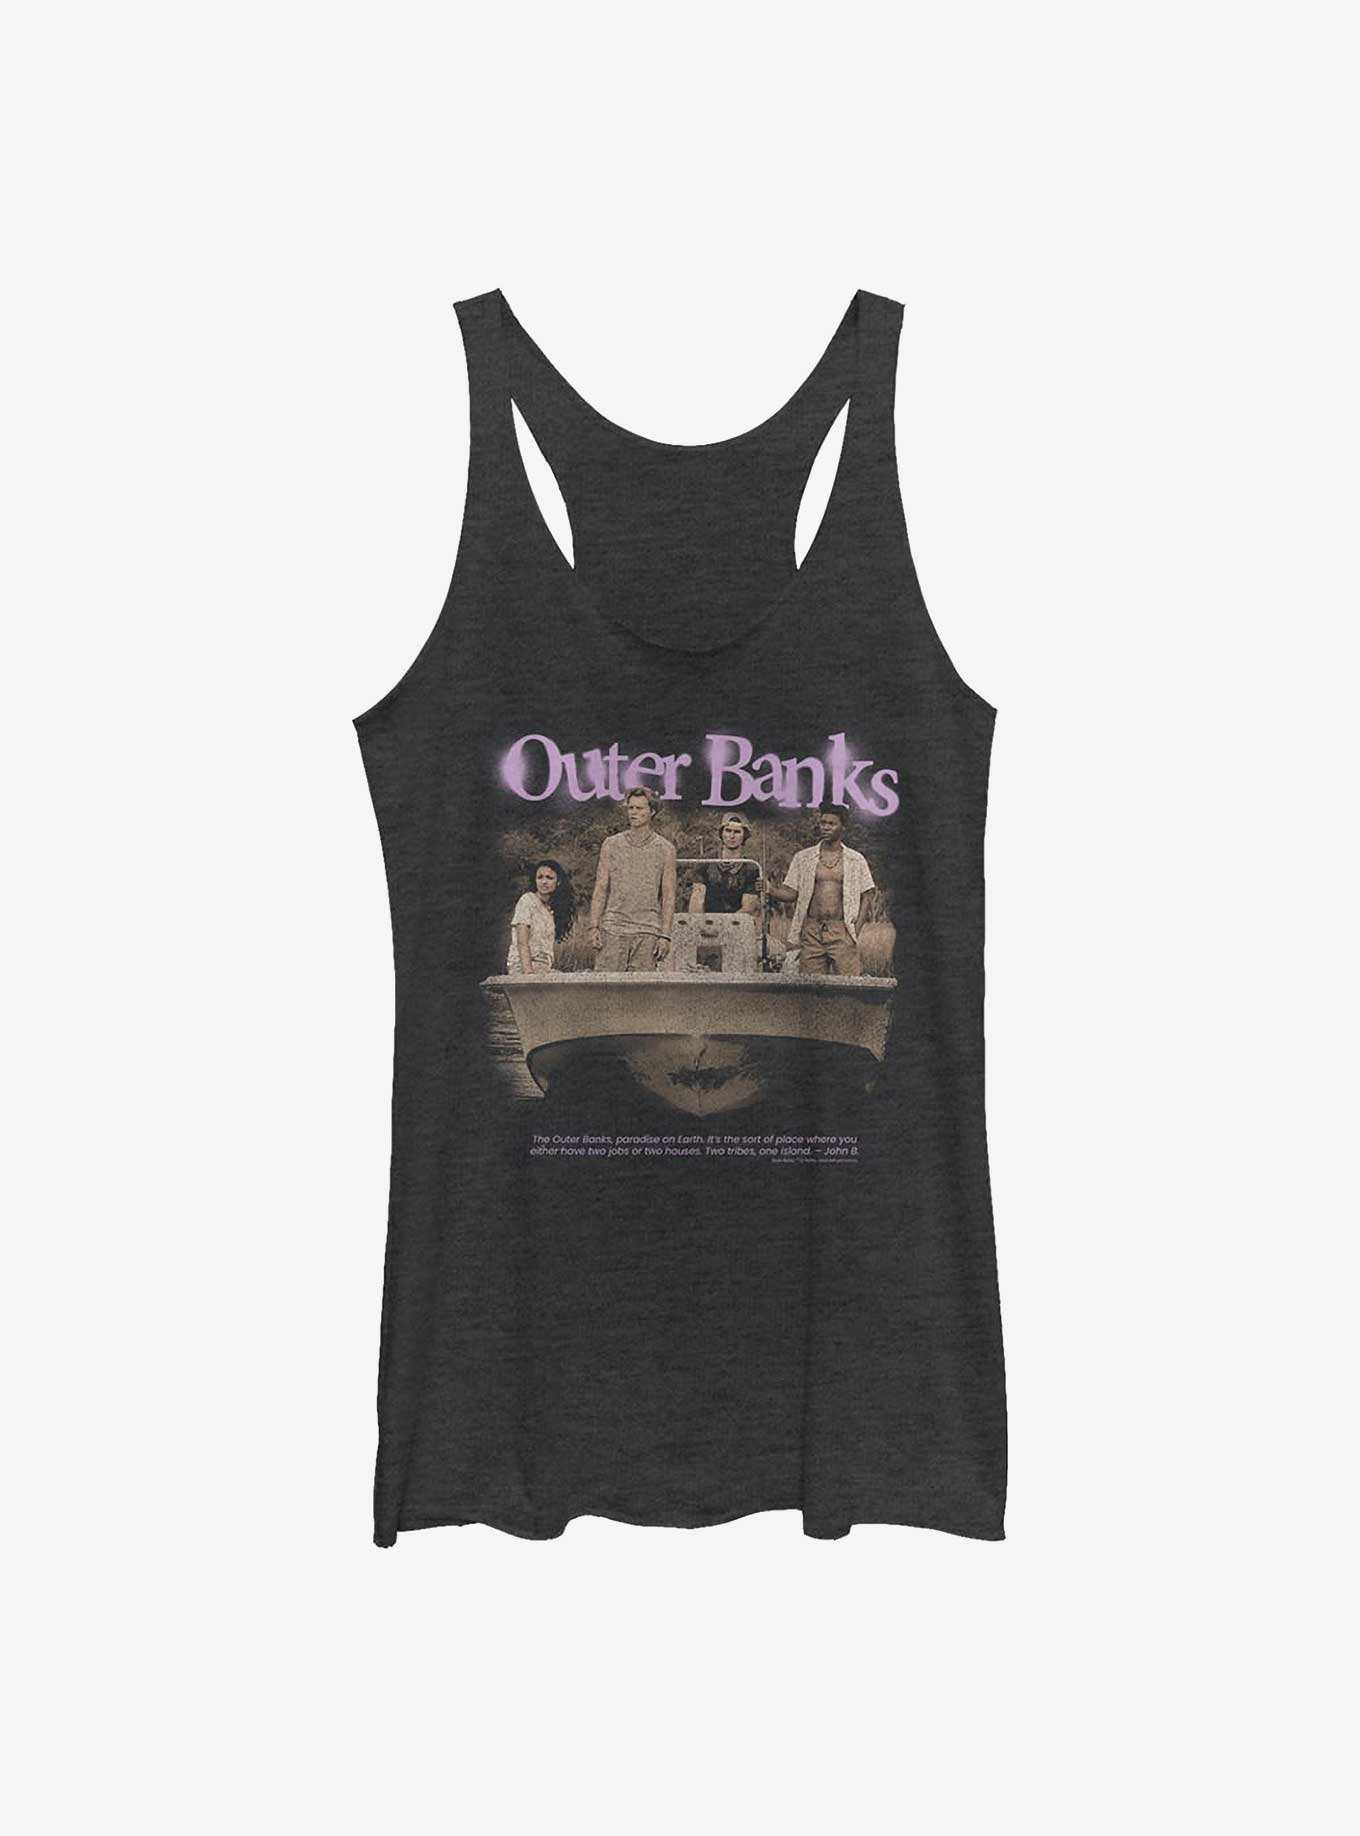 Outer Banks Spray Paint Girls Tank, , hi-res